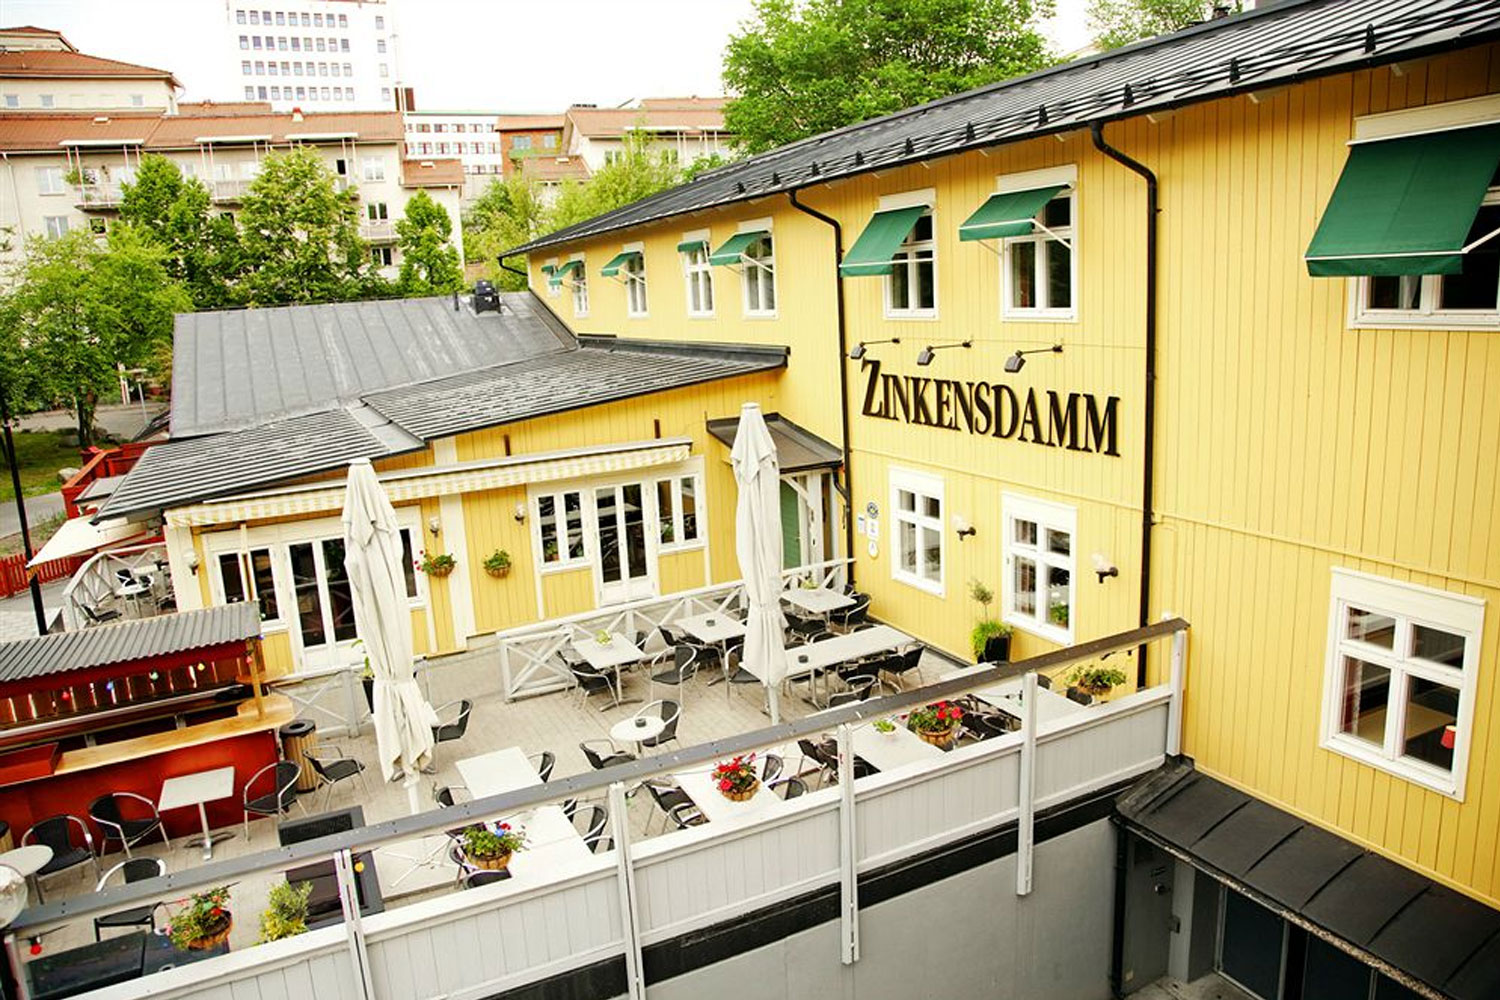 STF Zinkensdamm: Stockholm's Perfect Stay Option